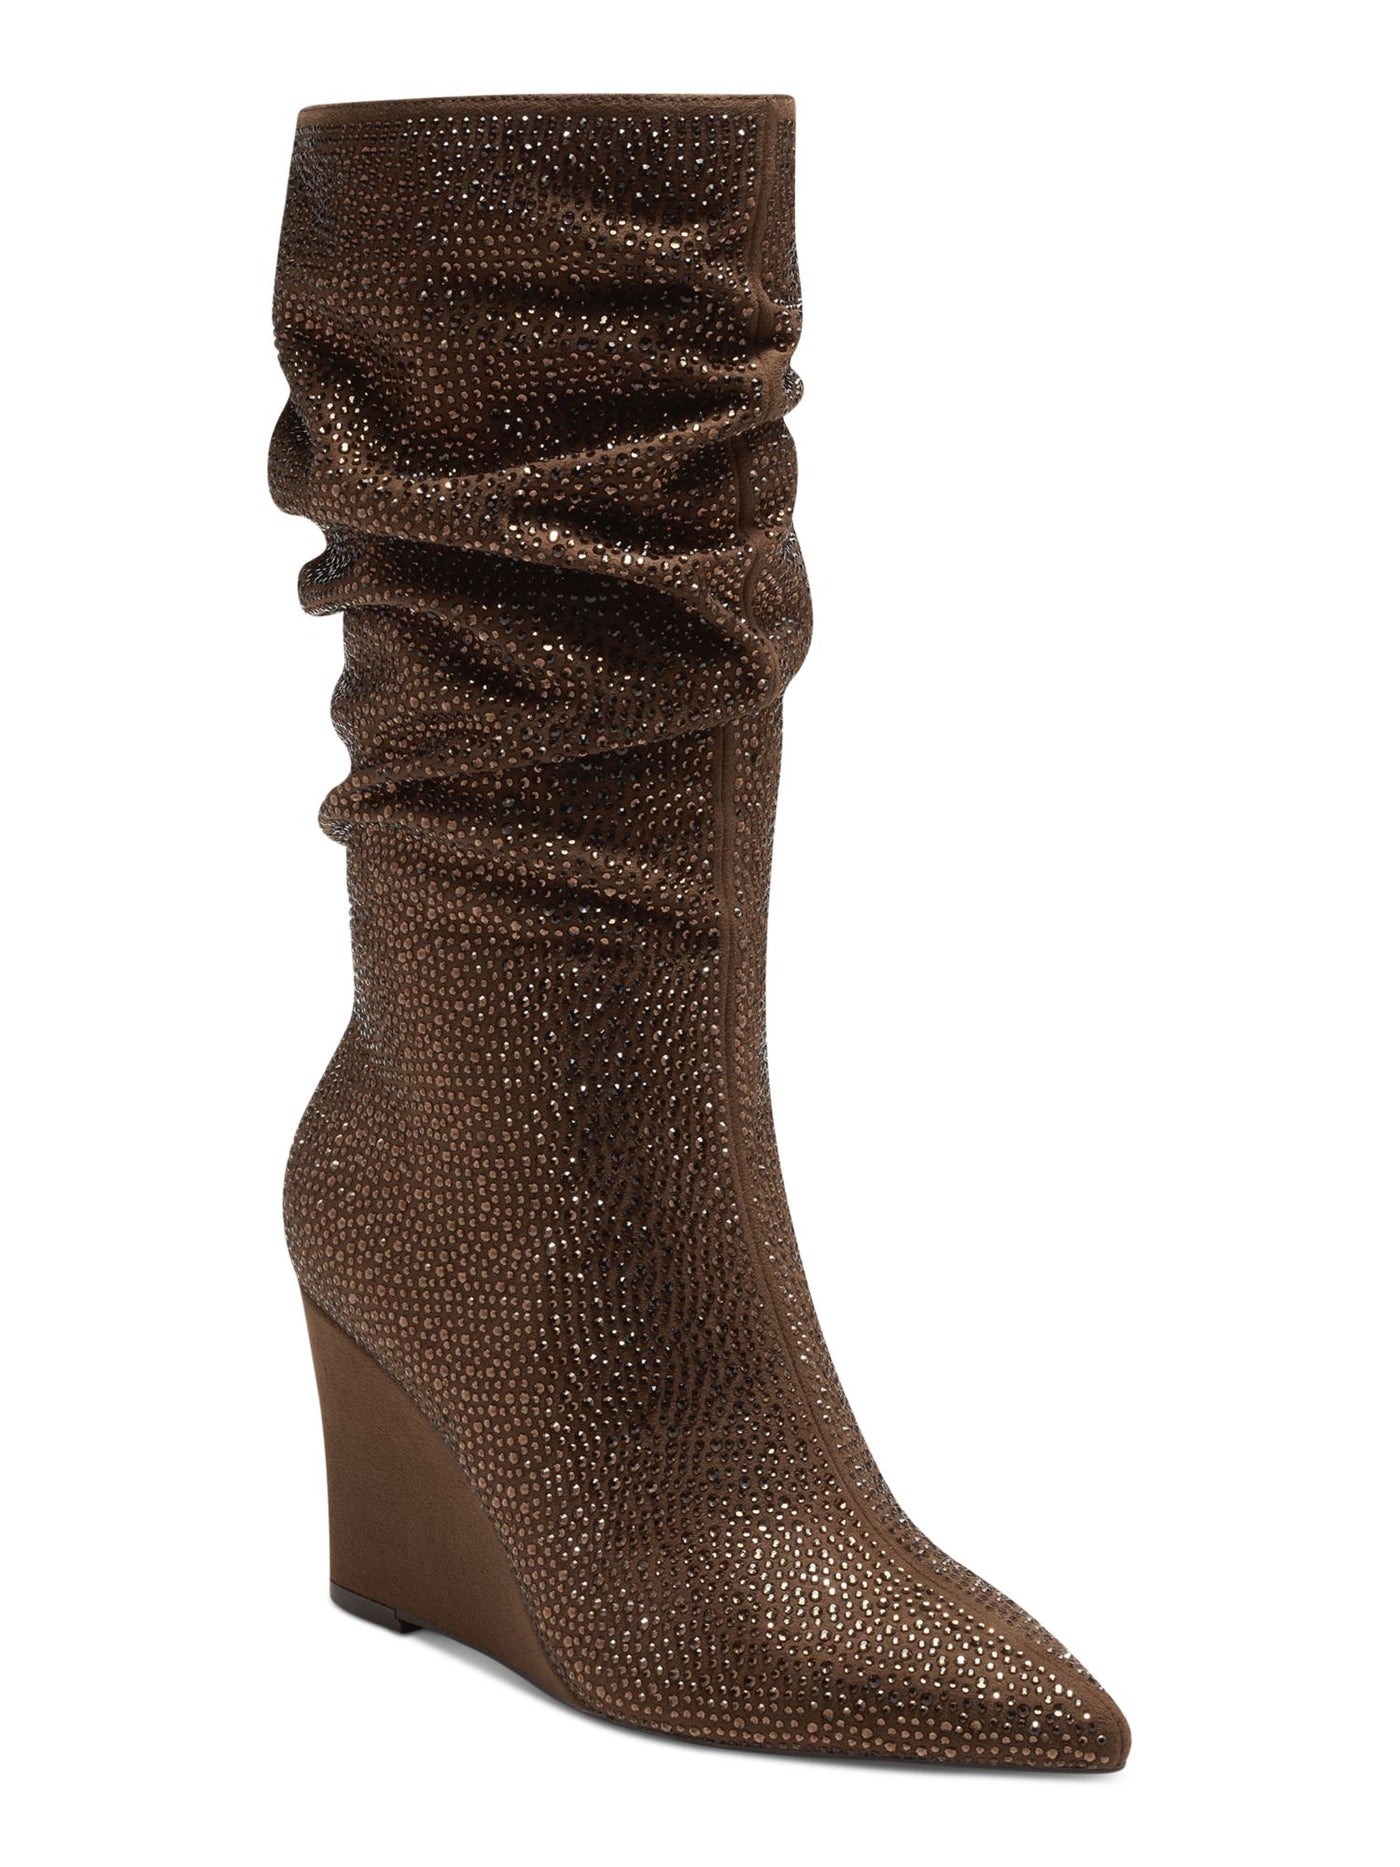 INC Womens Brown Cushioned Rhinestone Florelle Pointed Toe Wedge Zip-Up Dress Slouch Boot 7.5 M